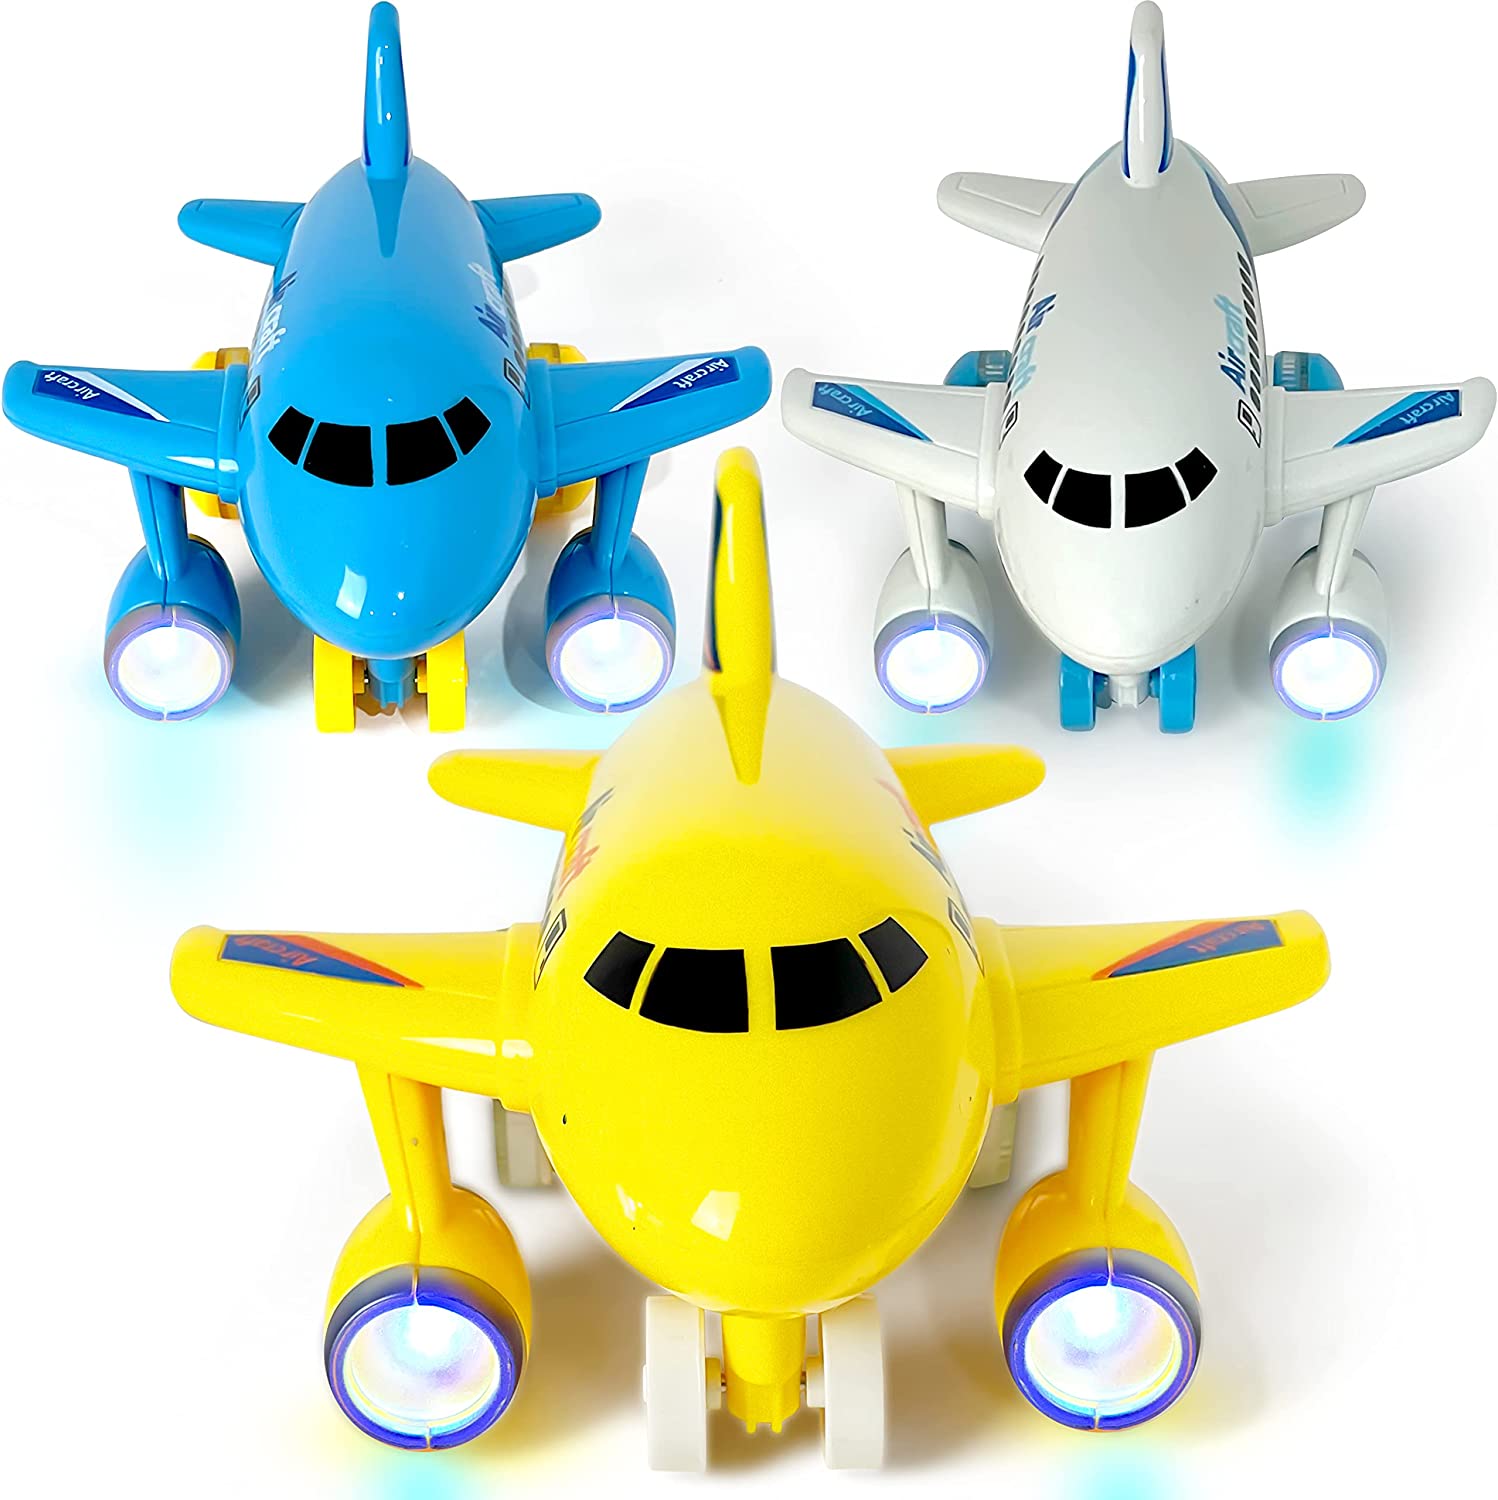 Kidsthrill Educational Toy Planes For Toddlers, 3-Piece